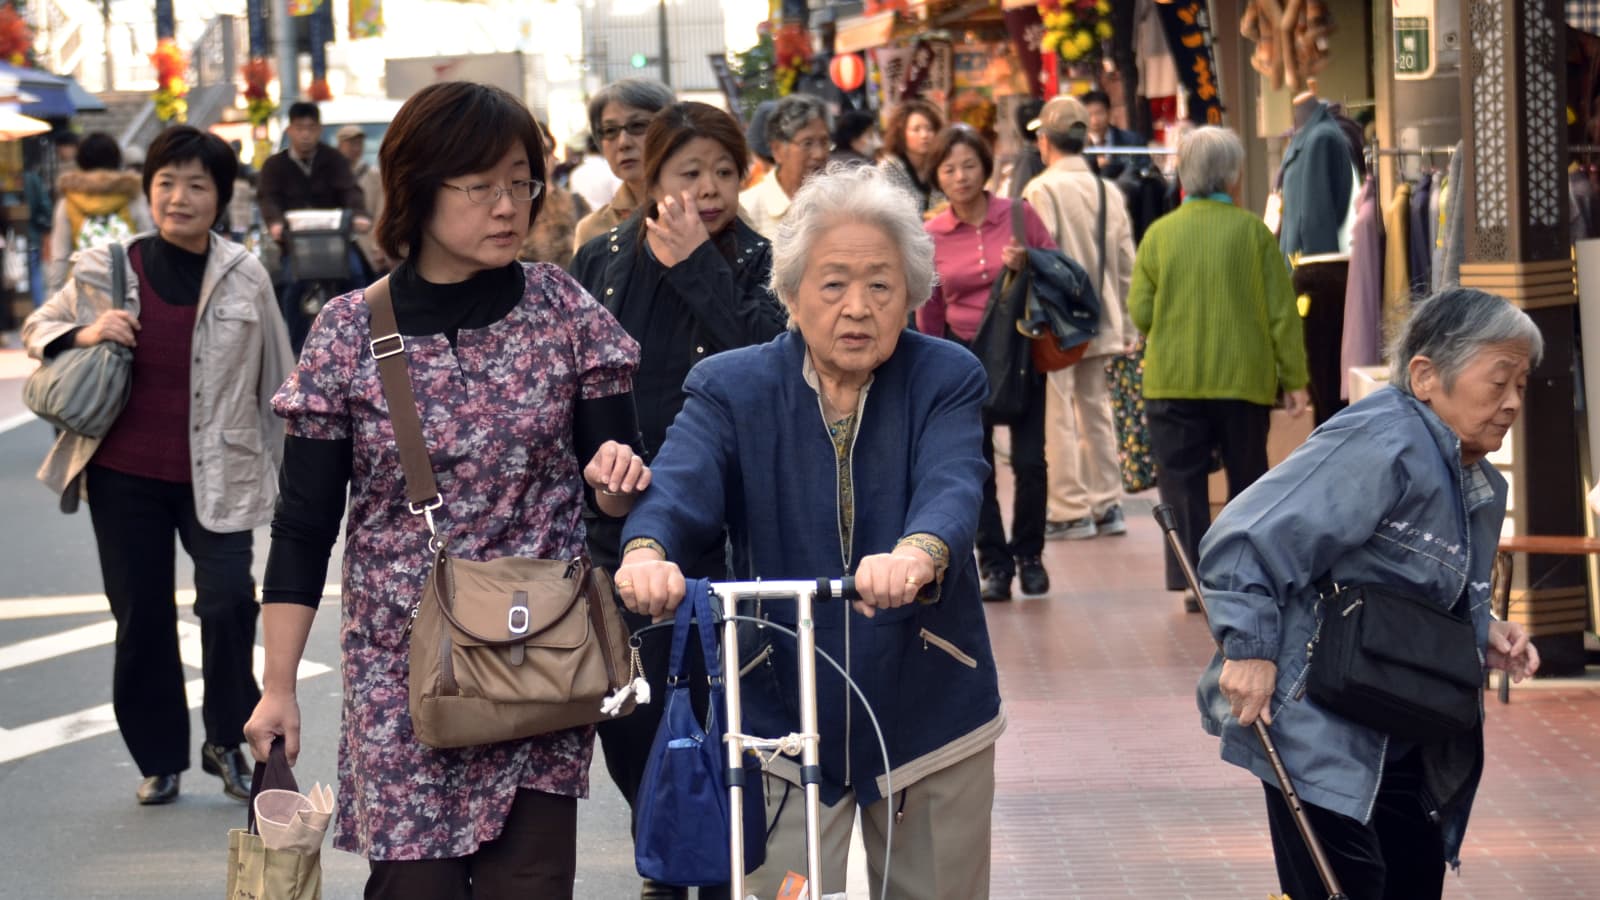 The Pension Crisis: Solutions for an Aging Population